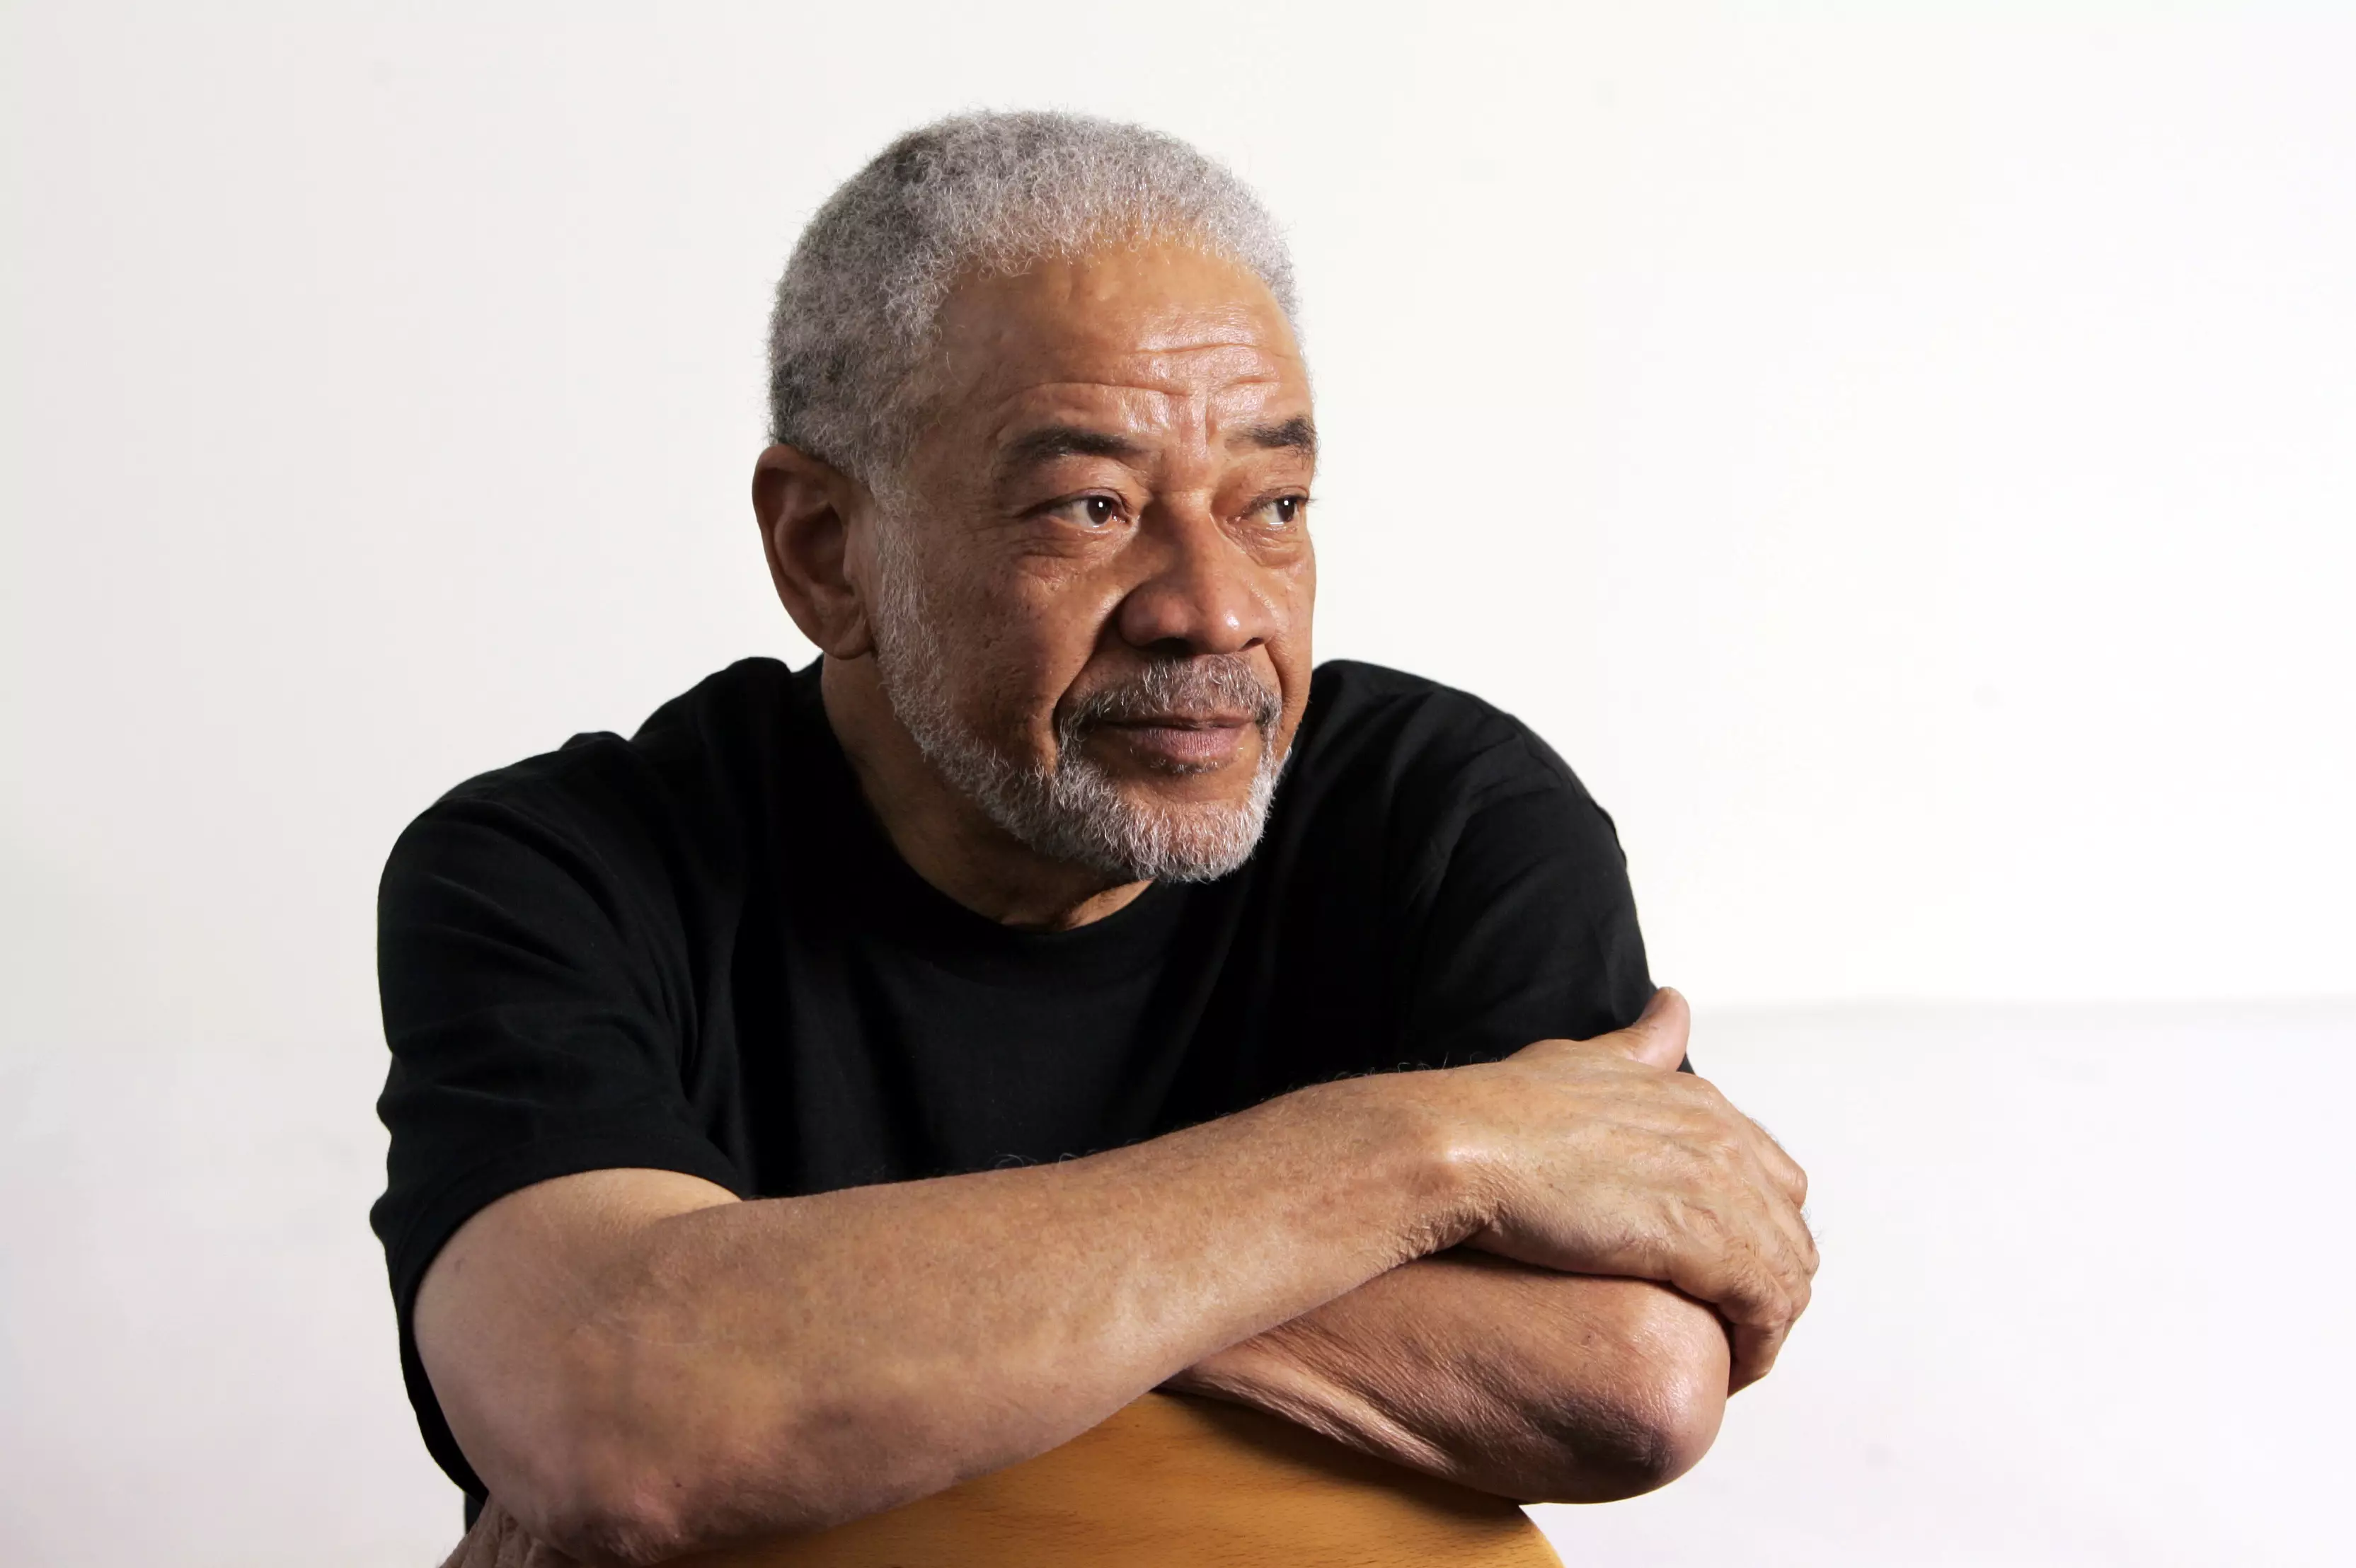 Bill Withers has passed away aged 81.